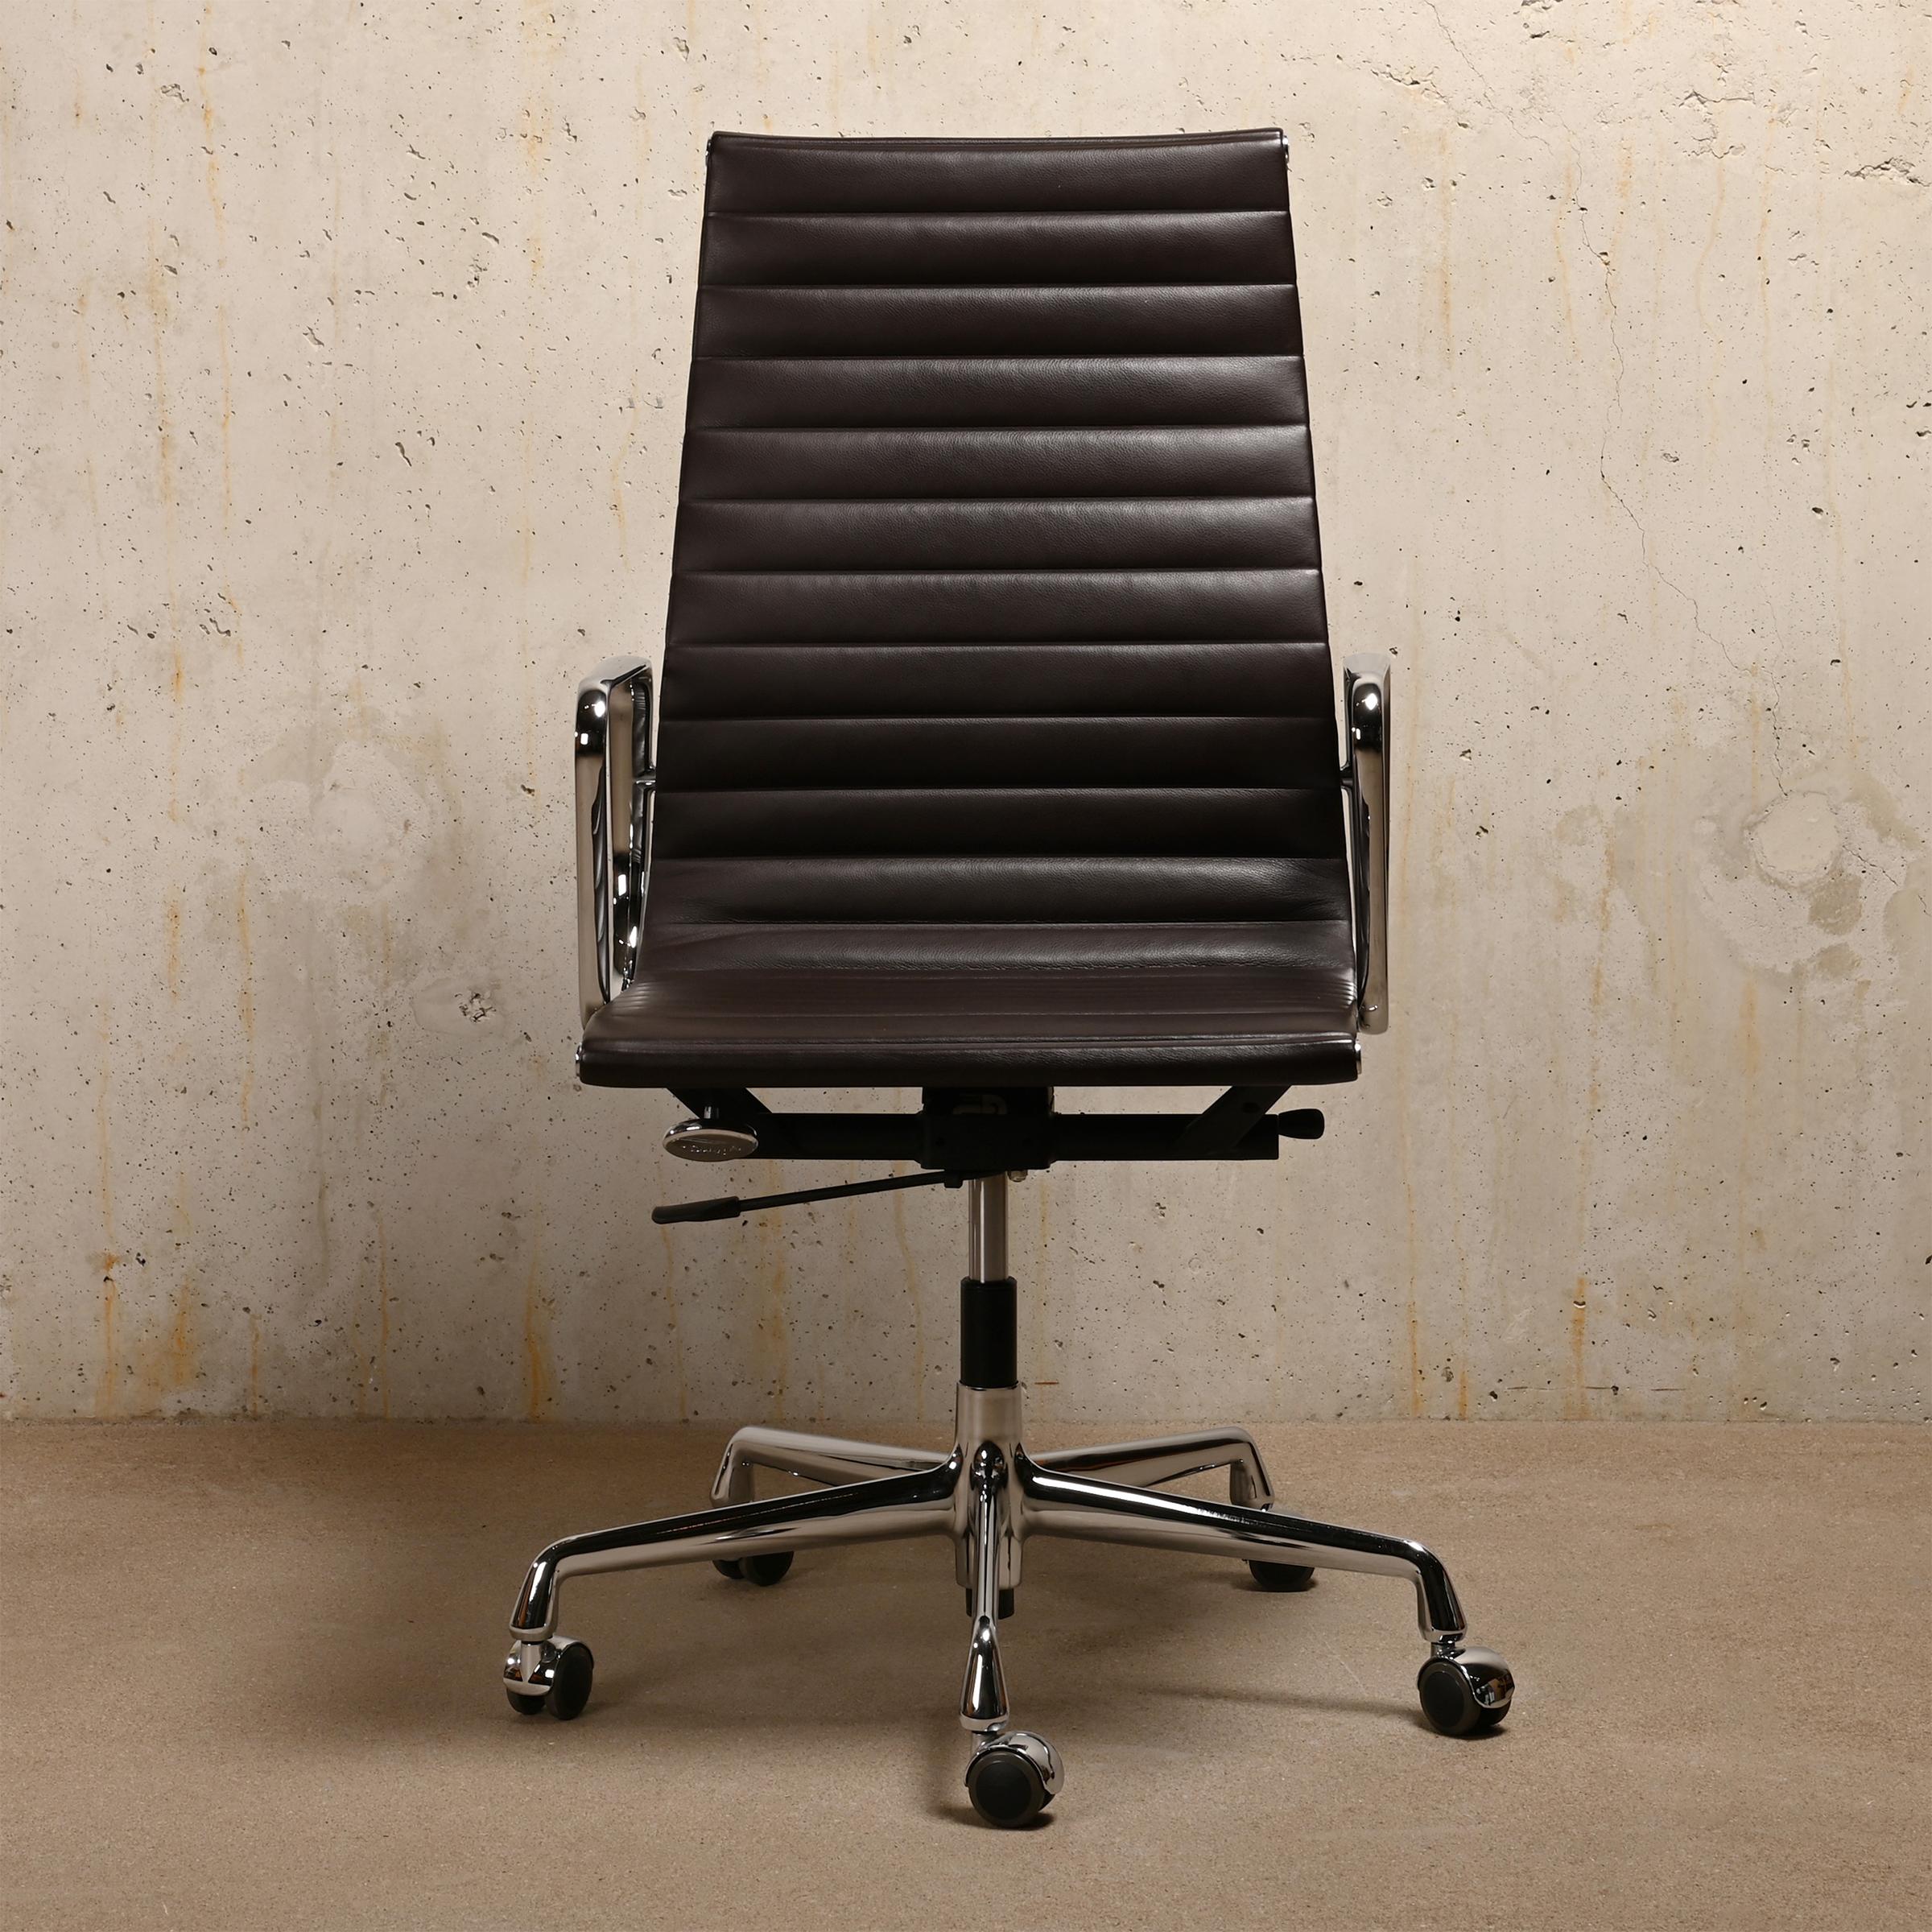 Executive Office Chair, model EA119, designed by Charles and Ray Eames for Vitra / Herman Miller. High backrest and seat in Chocolate dark brown leather. Frame, armrests and five-star base in die-cast aluminium with chrome-plated finish. Seat